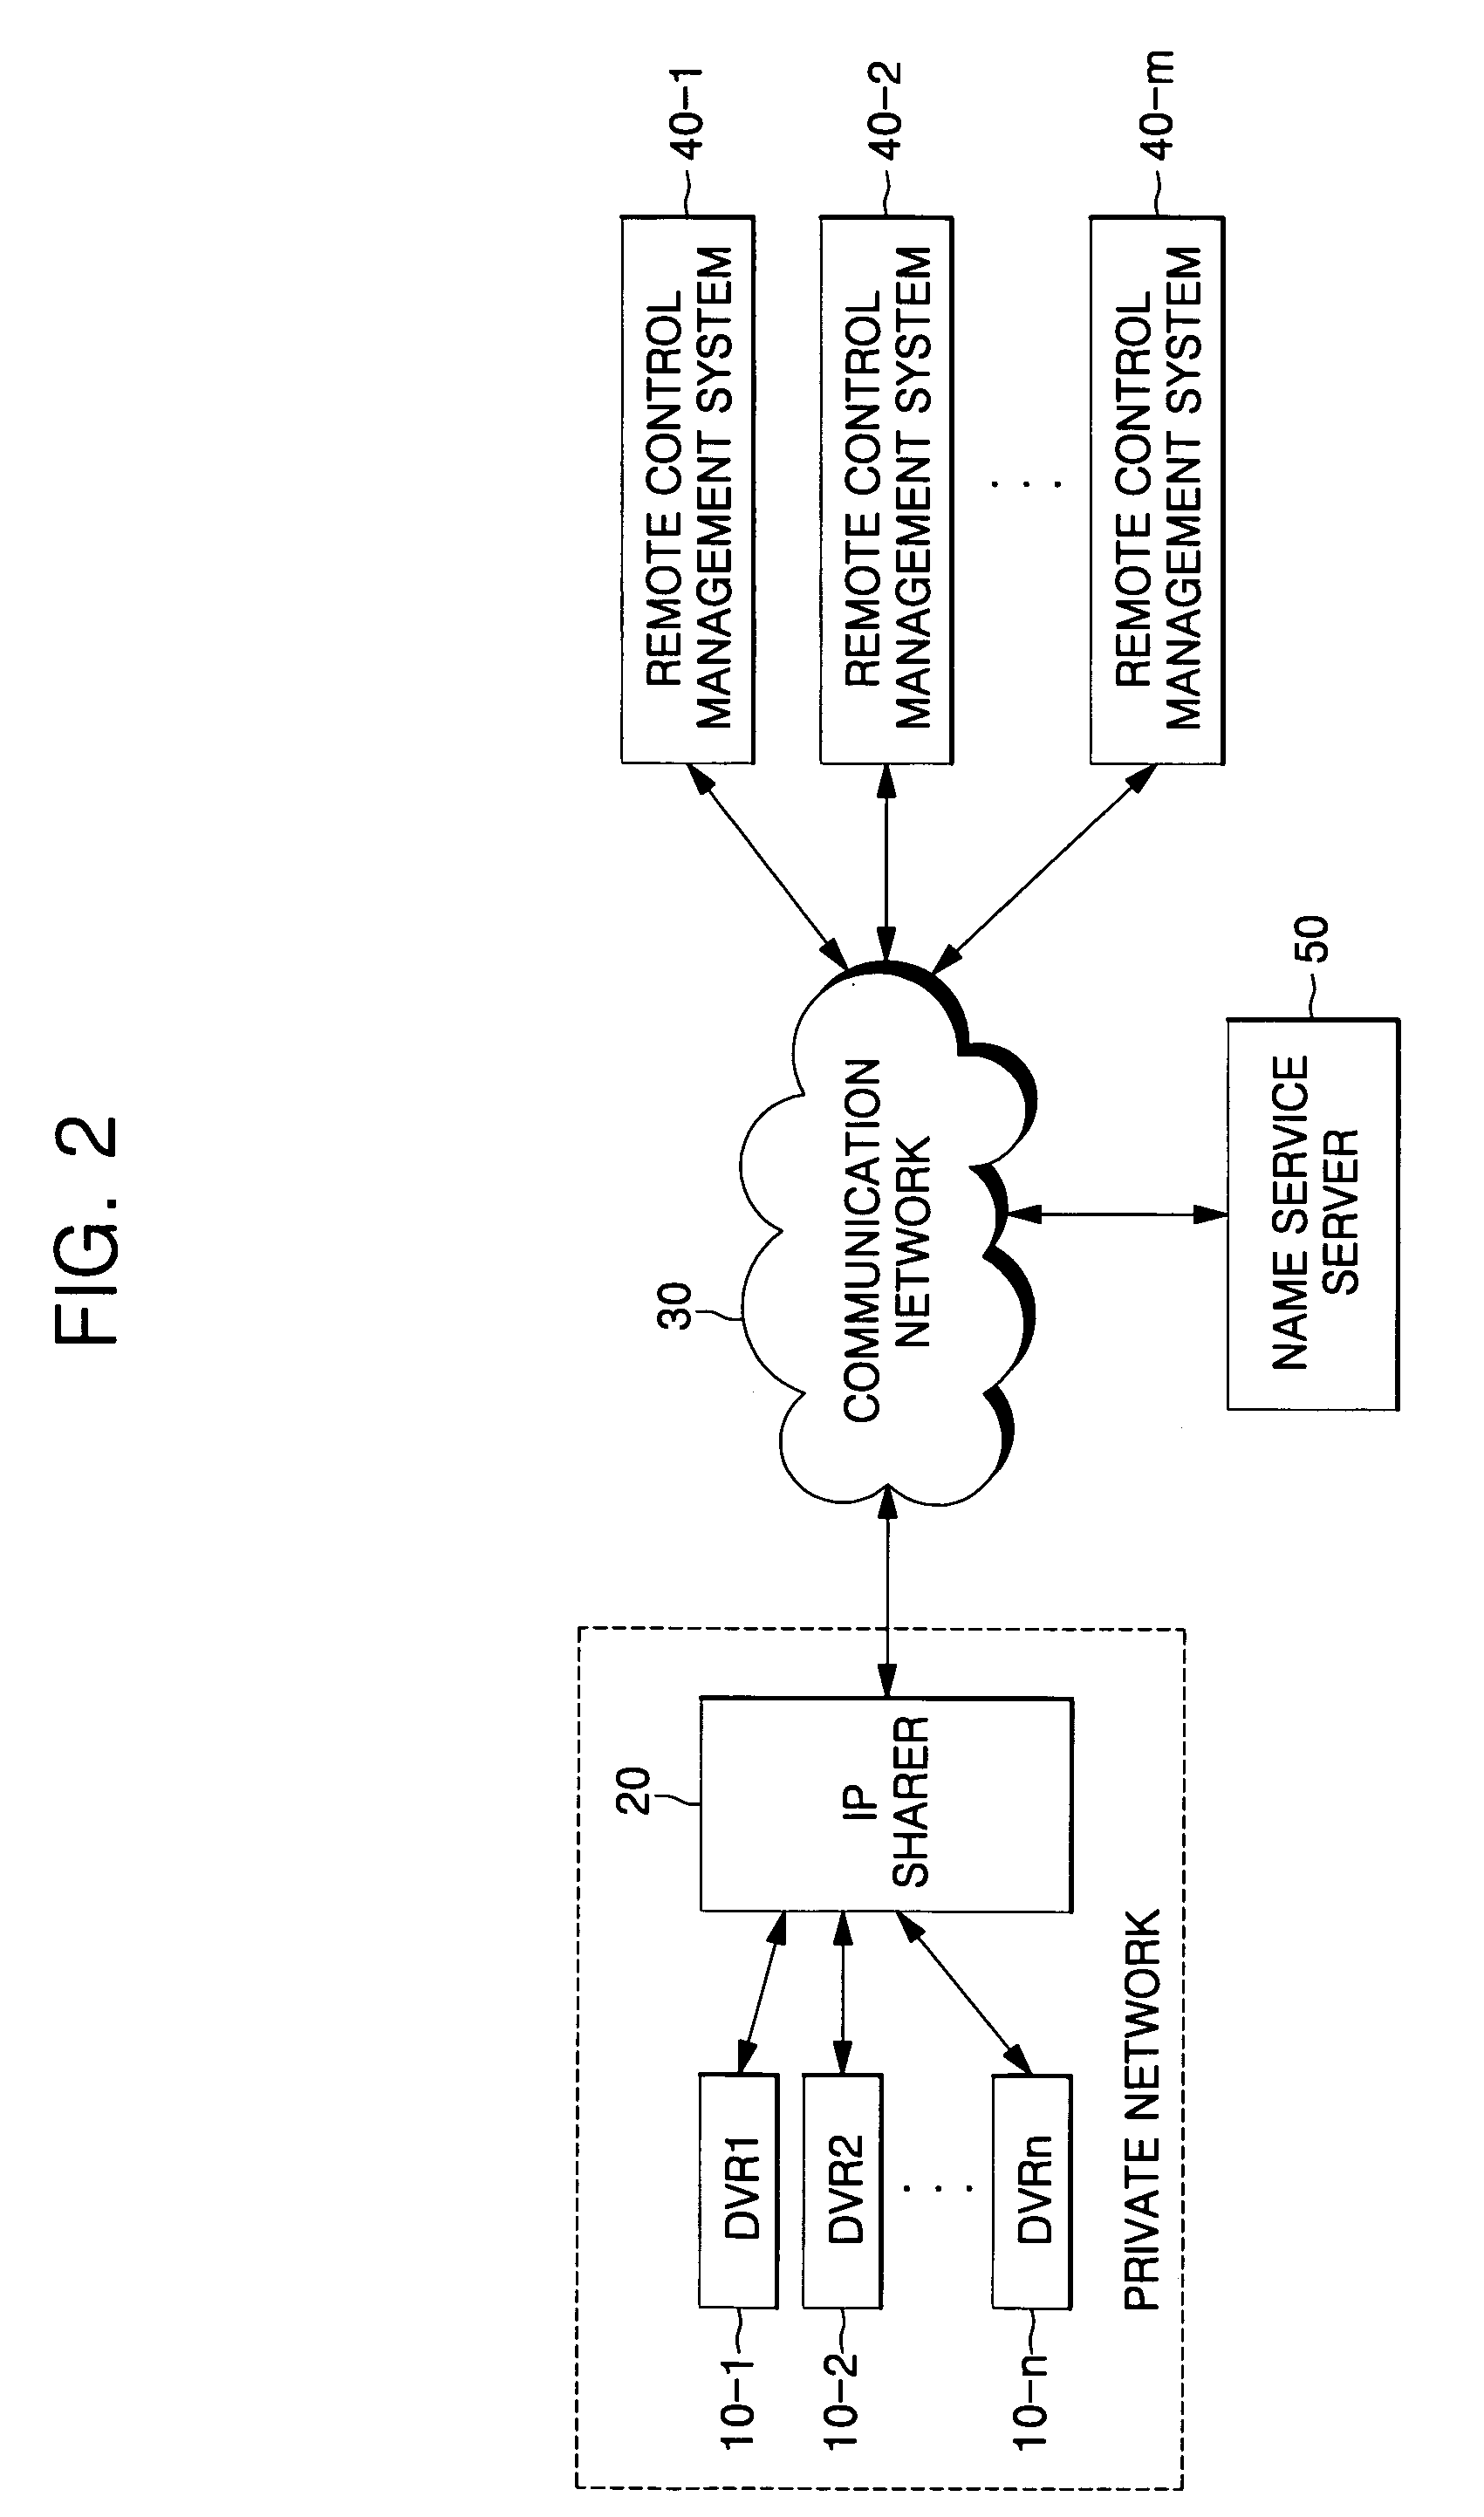 Name service system and method thereof